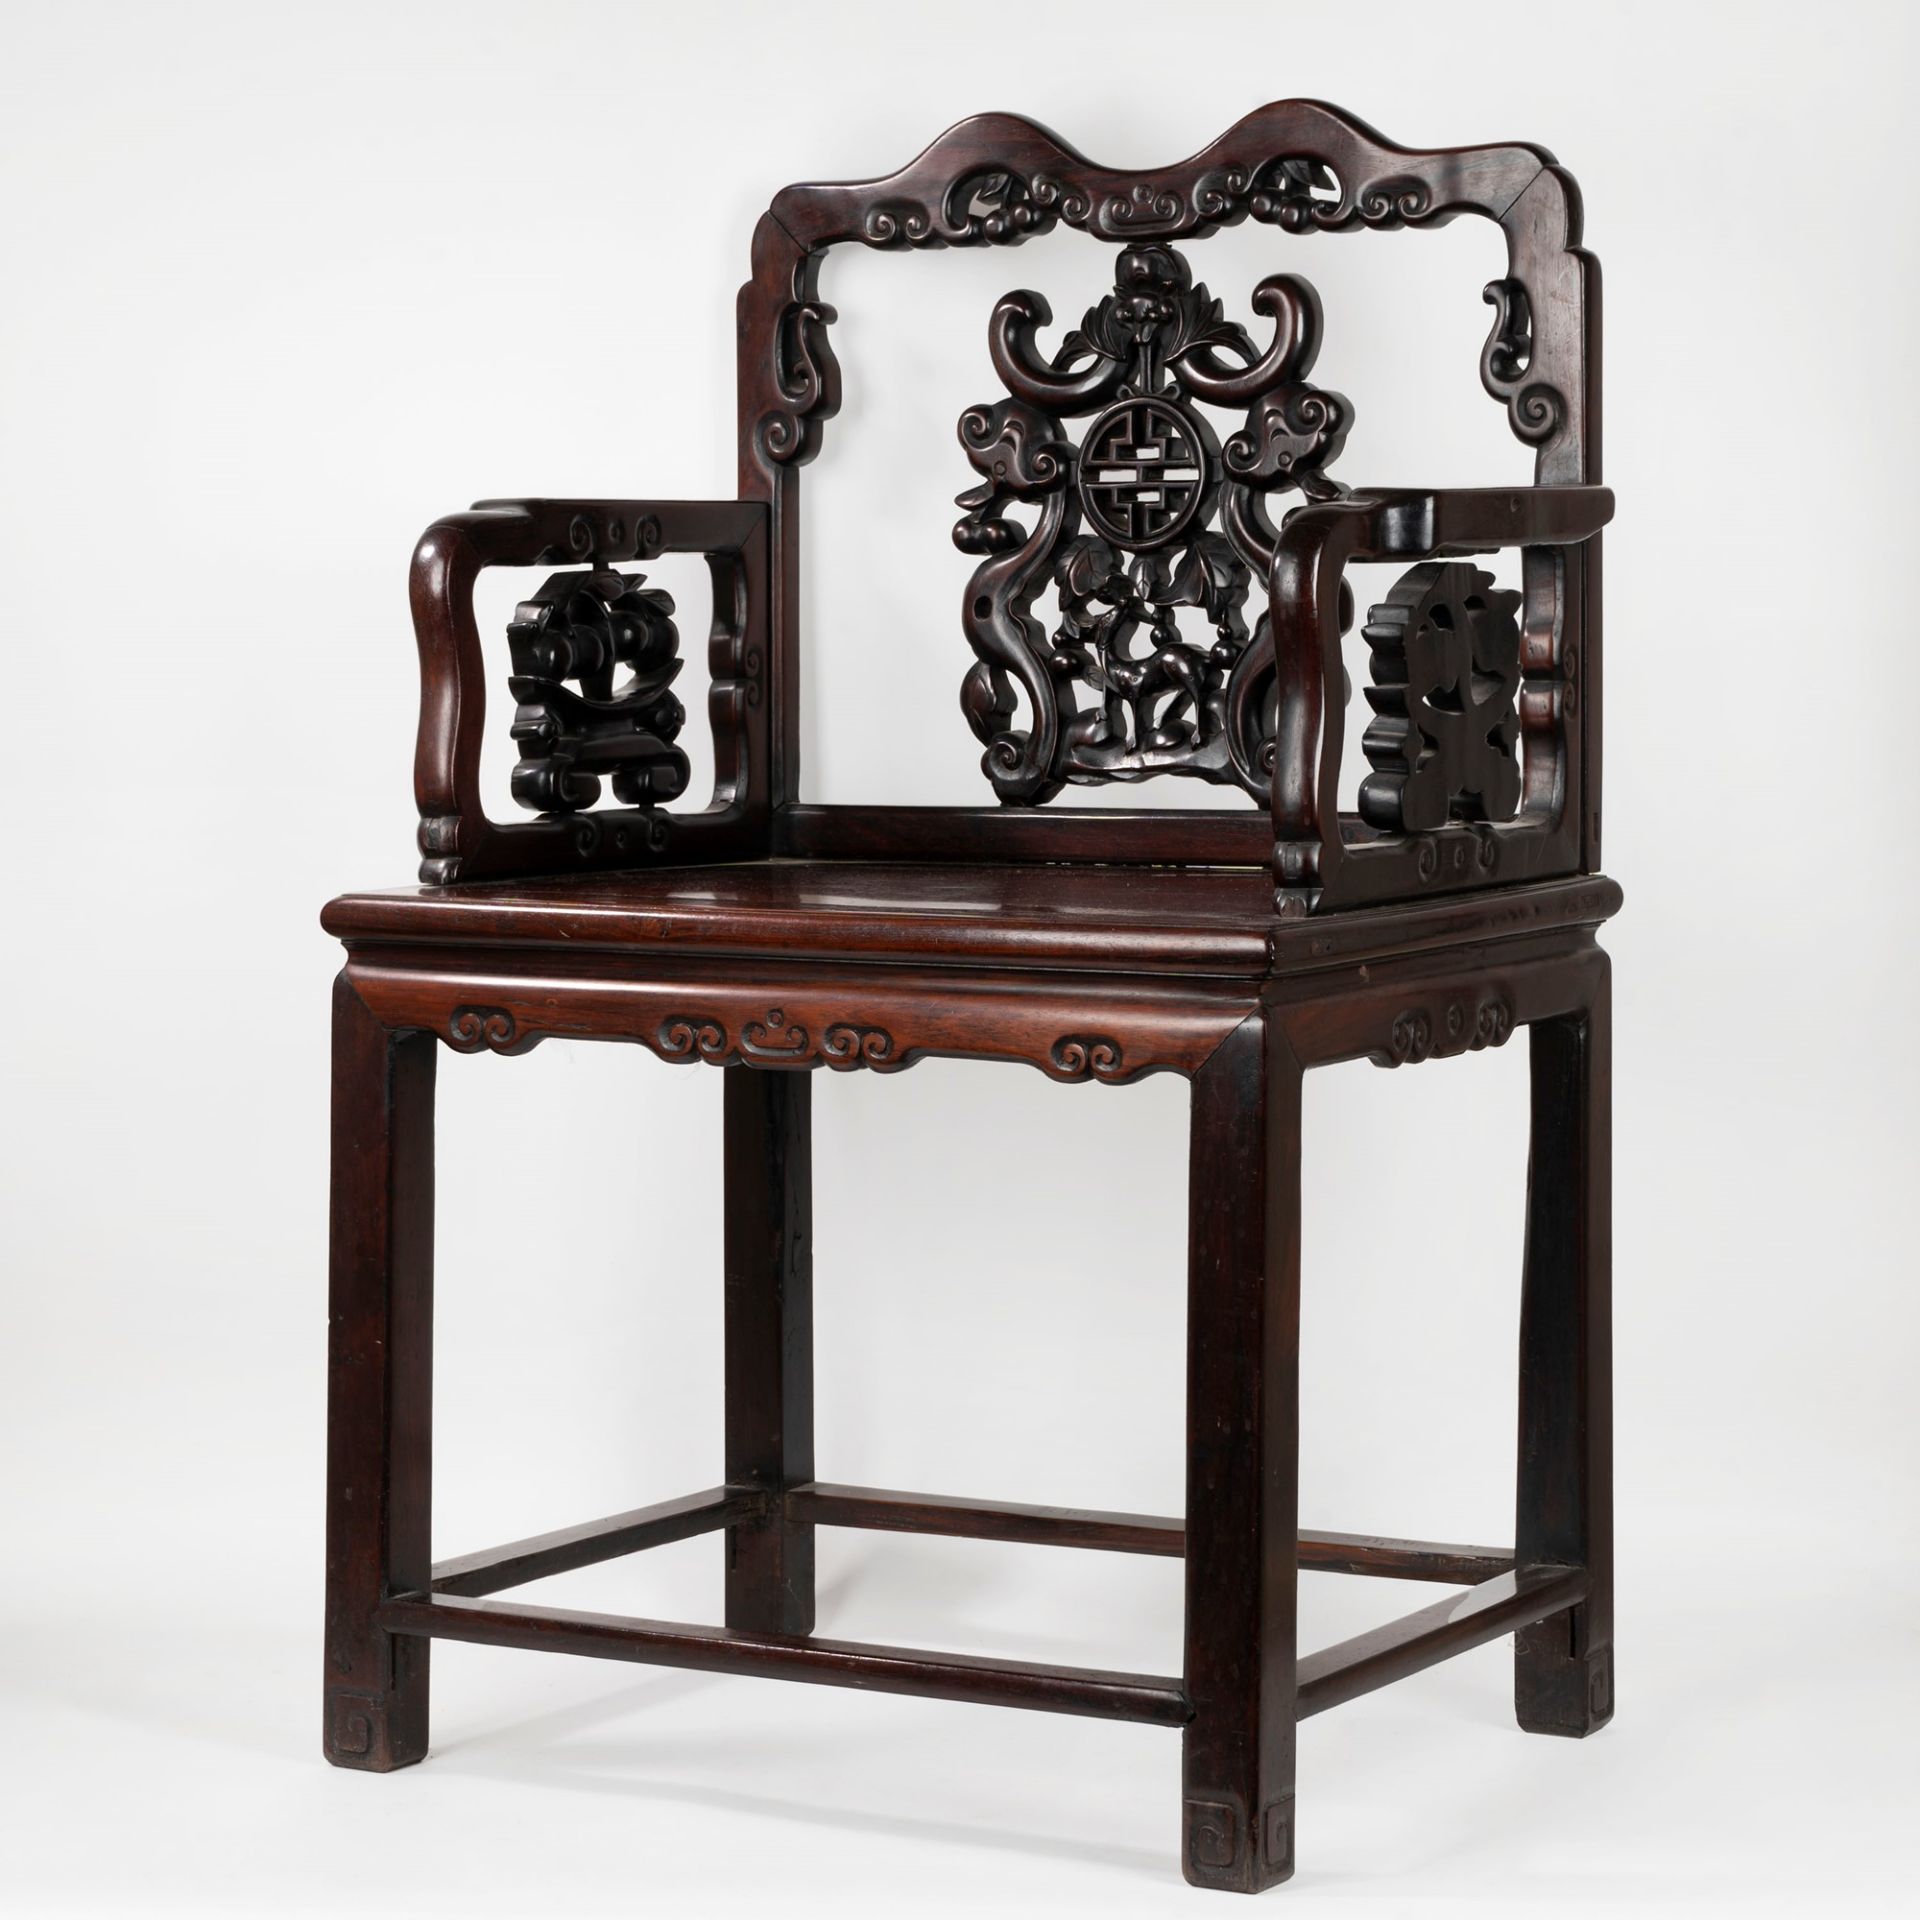 Pair of armchairs and a carved wooden table in oriental style, 20th century - Image 2 of 7